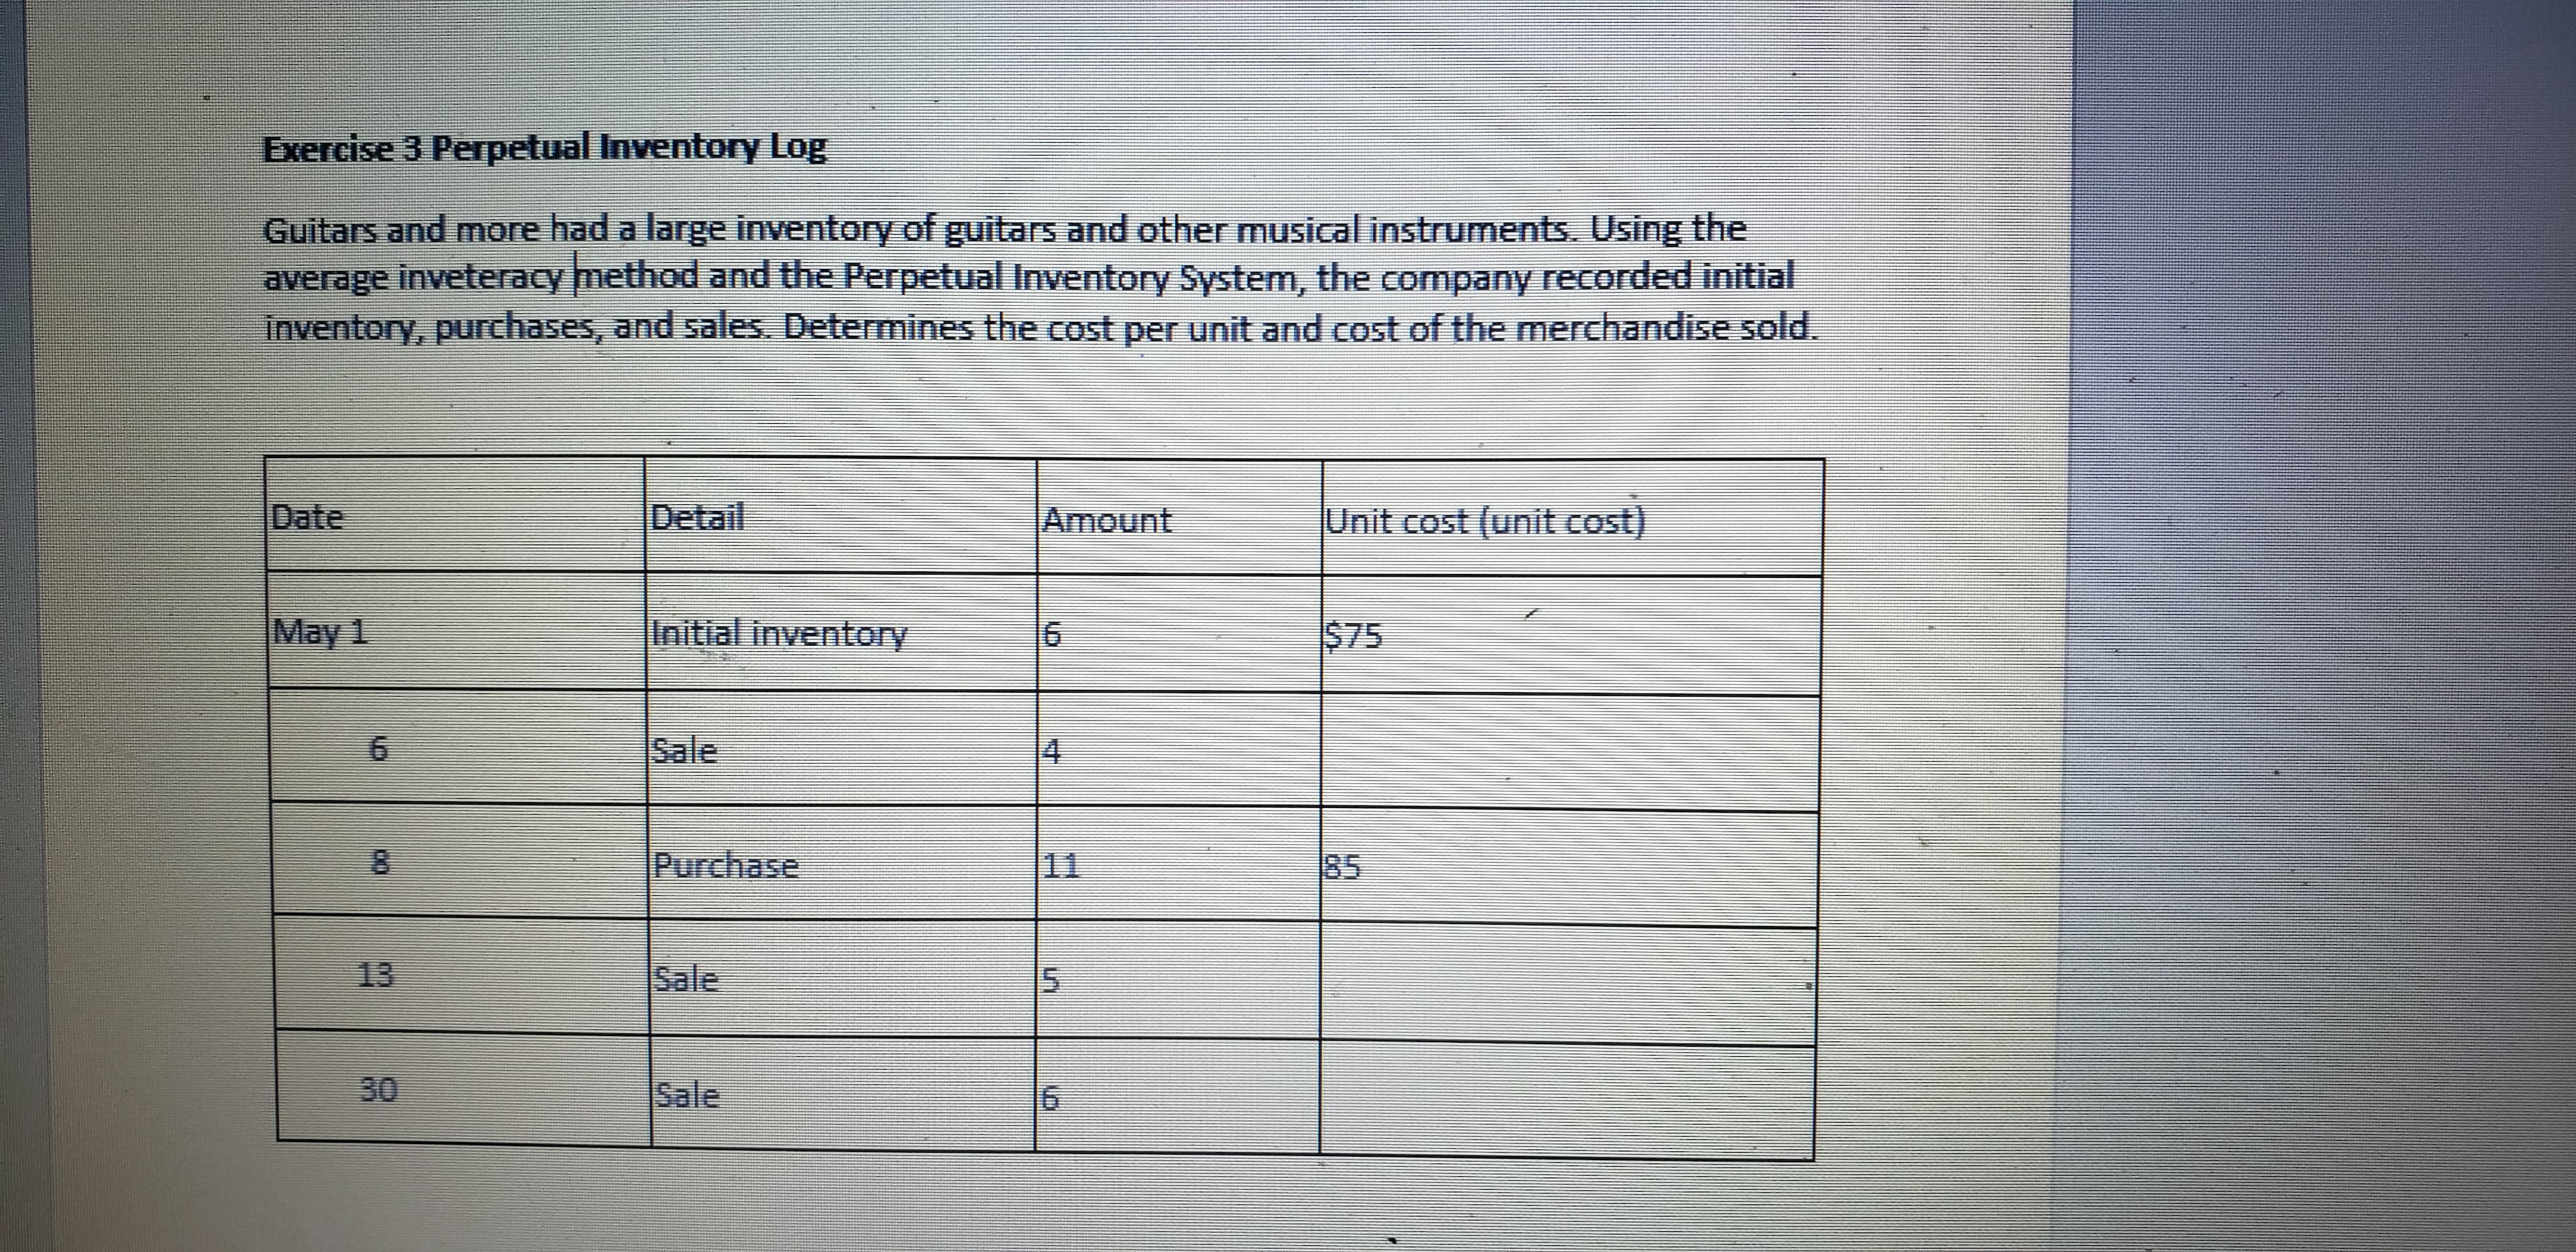 Exercise 3 Perpetual Inventory Log
Guitars and more had a large inventory of guitars and other musical instruments. Using the
average inveteracy method and the Perpetual Inventory System, the company recorded initial
Inventory, purchases, and sales. Determines the cost per unit and cost of the merchandise sold.
Date
Detail
Amount
Unit cost (unit cost)
May 1
Initial inventory
$75
Sale
4.
8.
Purchase
11
85
13
Sale
30
Sale
5,
